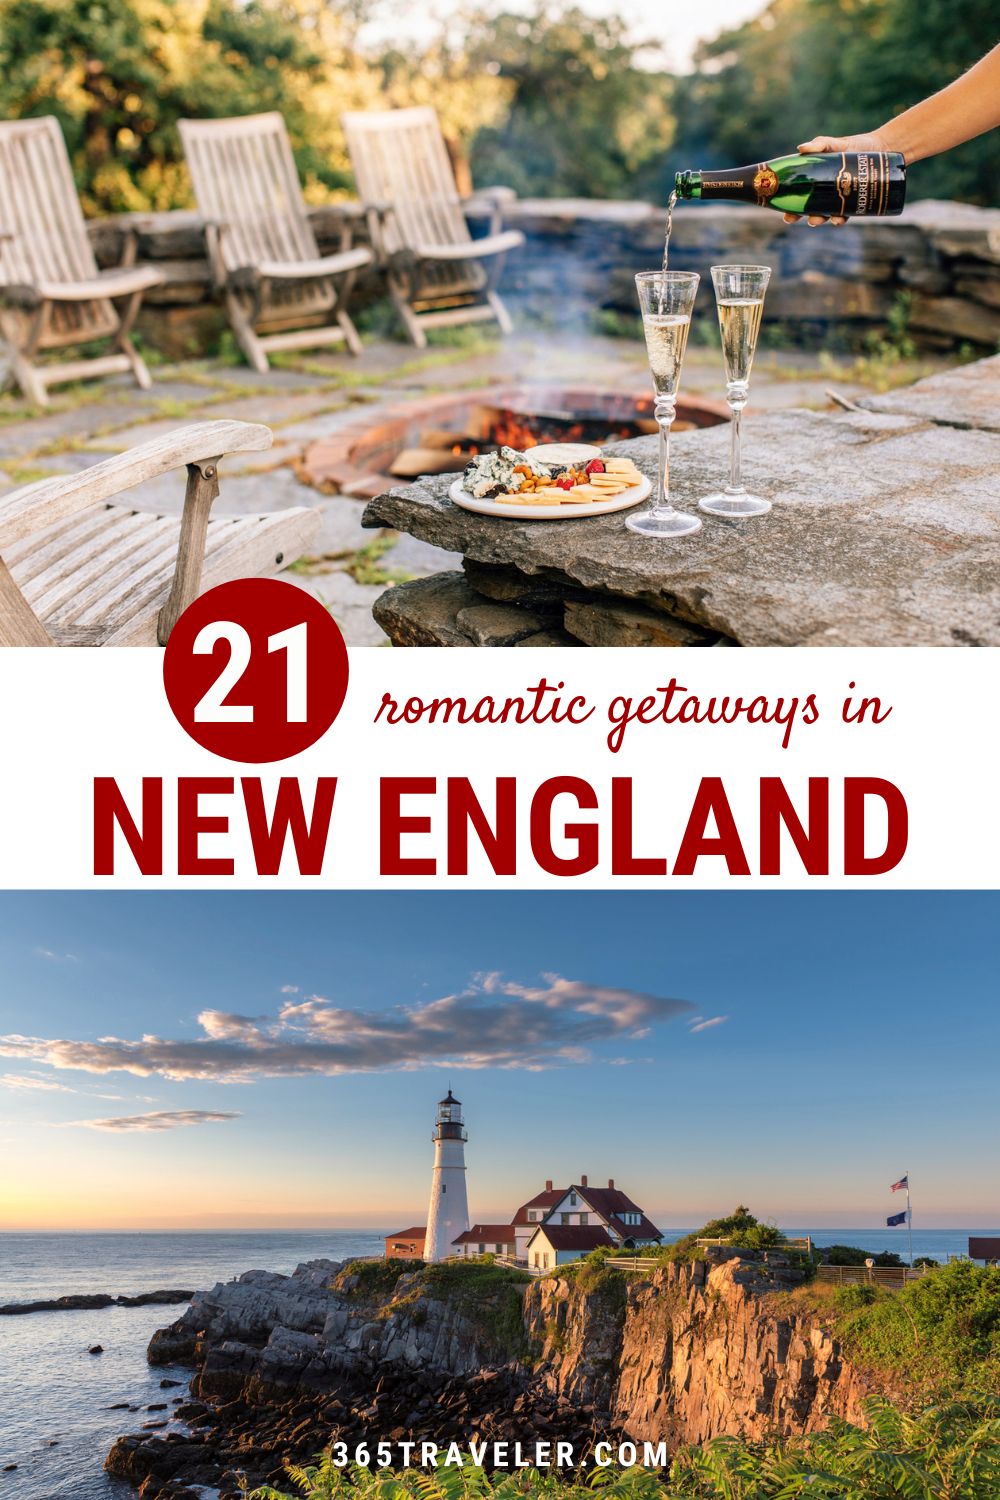 21 Romantic Getaways in New England You’ll Adore